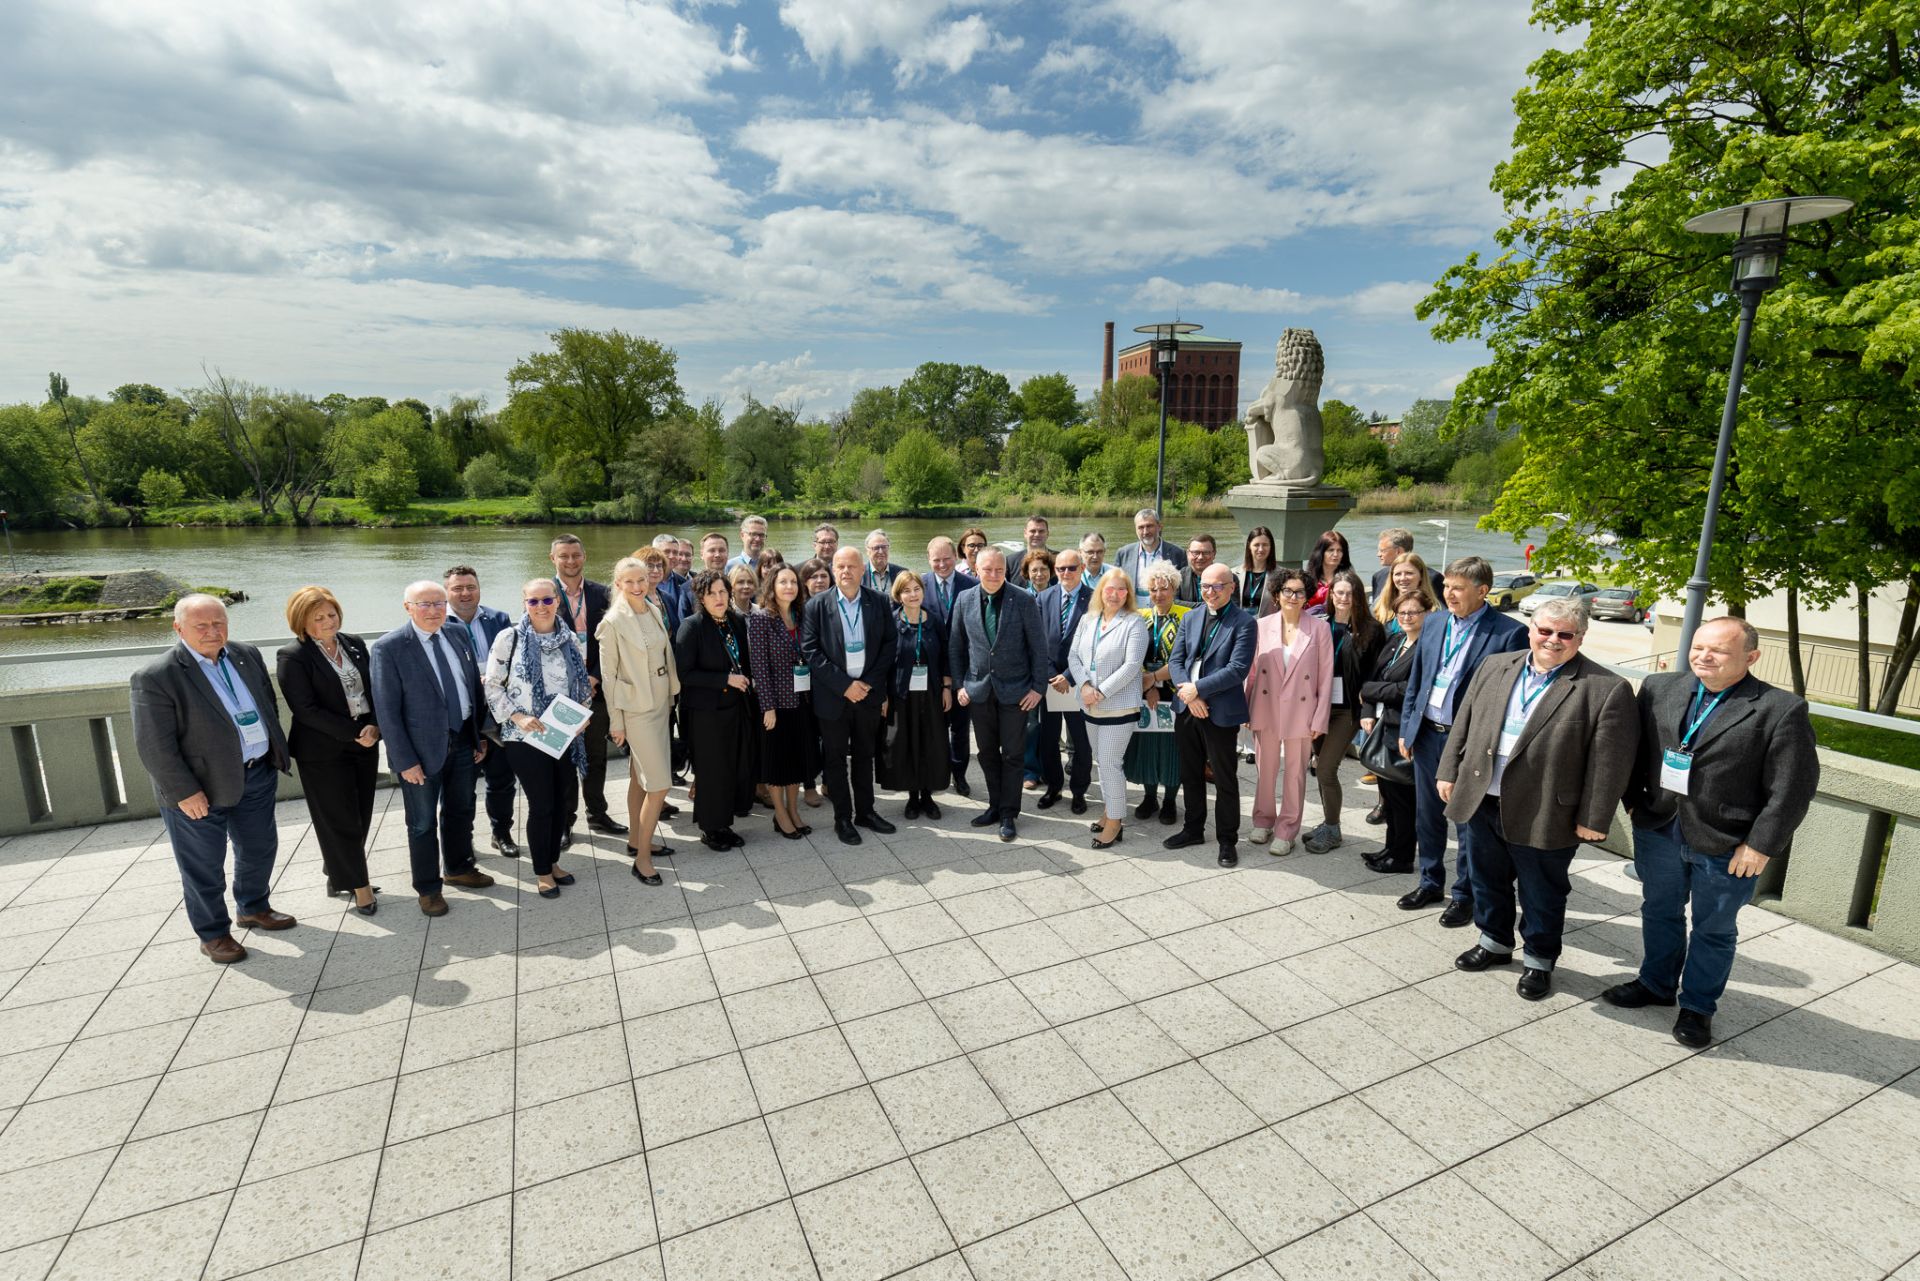 Participants of the meeting of the NCN Council with the participation of the management and representatives of the scientific community of the region, fot. Łukasz Bera for NCN